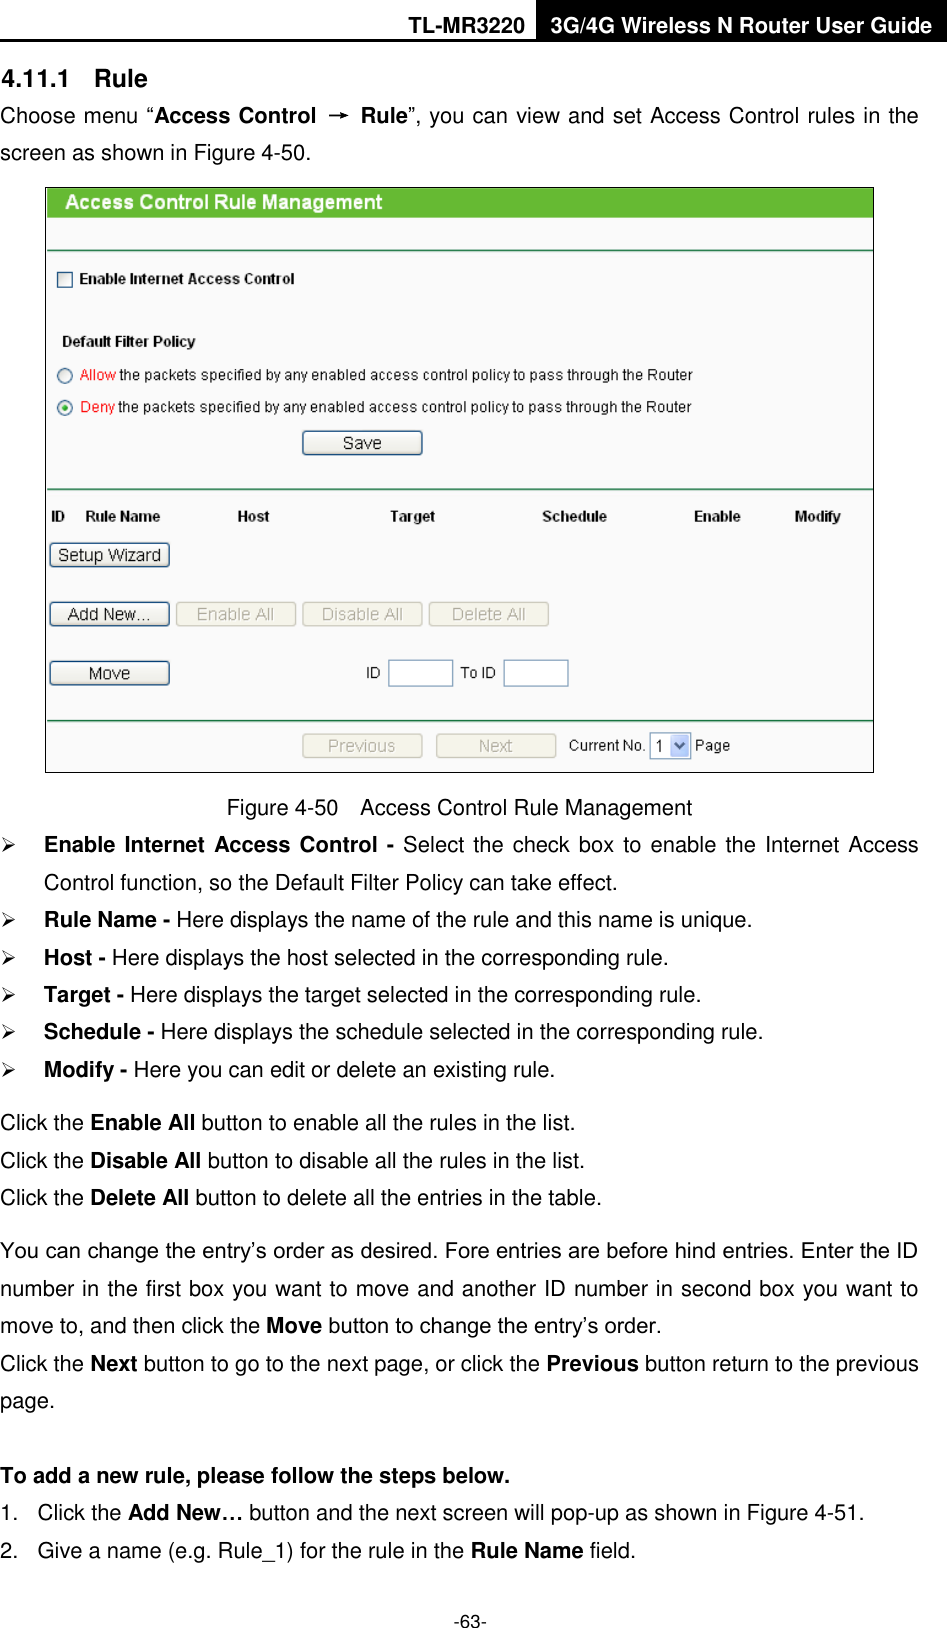 TL-MR3220 3G/4G Wireless N Router User Guide  -63- 4.11.1  Rule Choose menu “Access Control  →  Rule”, you can view and set Access Control rules in the screen as shown in Figure 4-50.    Figure 4-50  Access Control Rule Management  Enable Internet Access Control - Select the check box to enable the Internet Access Control function, so the Default Filter Policy can take effect.    Rule Name - Here displays the name of the rule and this name is unique.    Host - Here displays the host selected in the corresponding rule.    Target - Here displays the target selected in the corresponding rule.    Schedule - Here displays the schedule selected in the corresponding rule.    Modify - Here you can edit or delete an existing rule.   Click the Enable All button to enable all the rules in the list. Click the Disable All button to disable all the rules in the list. Click the Delete All button to delete all the entries in the table. You can change the entry’s order as desired. Fore entries are before hind entries. Enter the ID number in the first box you want to move and another ID number in second box you want to move to, and then click the Move button to change the entry’s order. Click the Next button to go to the next page, or click the Previous button return to the previous page.  To add a new rule, please follow the steps below. 1.  Click the Add New… button and the next screen will pop-up as shown in Figure 4-51. 2.  Give a name (e.g. Rule_1) for the rule in the Rule Name field. 